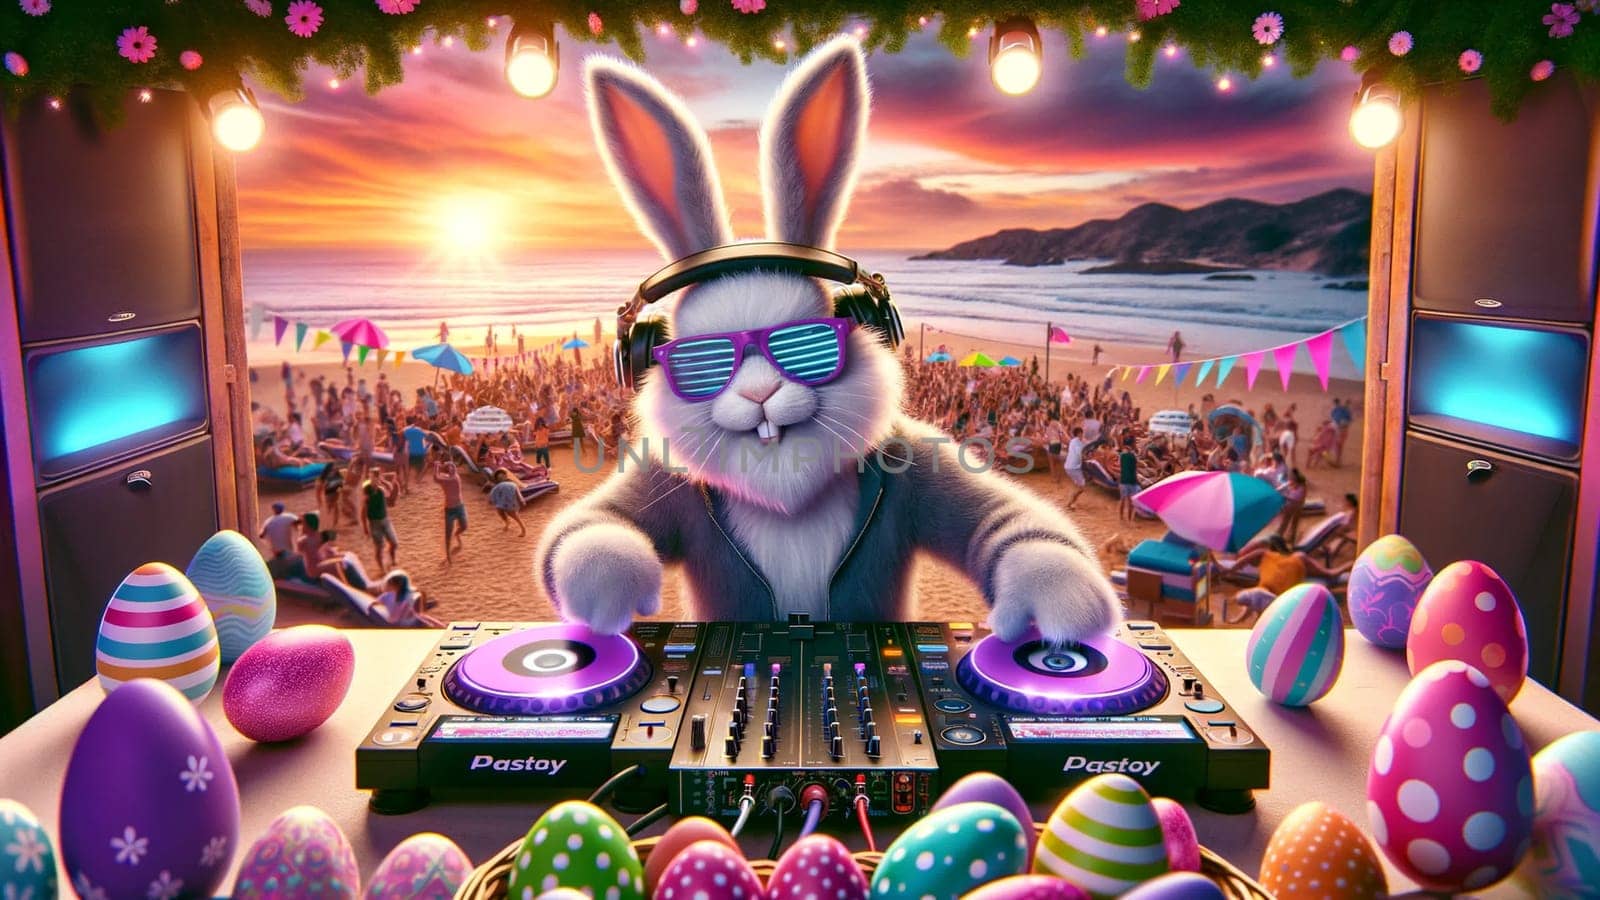 A DJ Easter Bunny with neon sunglasses spins records at a beach party with Easter eggs and decorations on the DJ booth, as the sun sets in the background. High quality photo